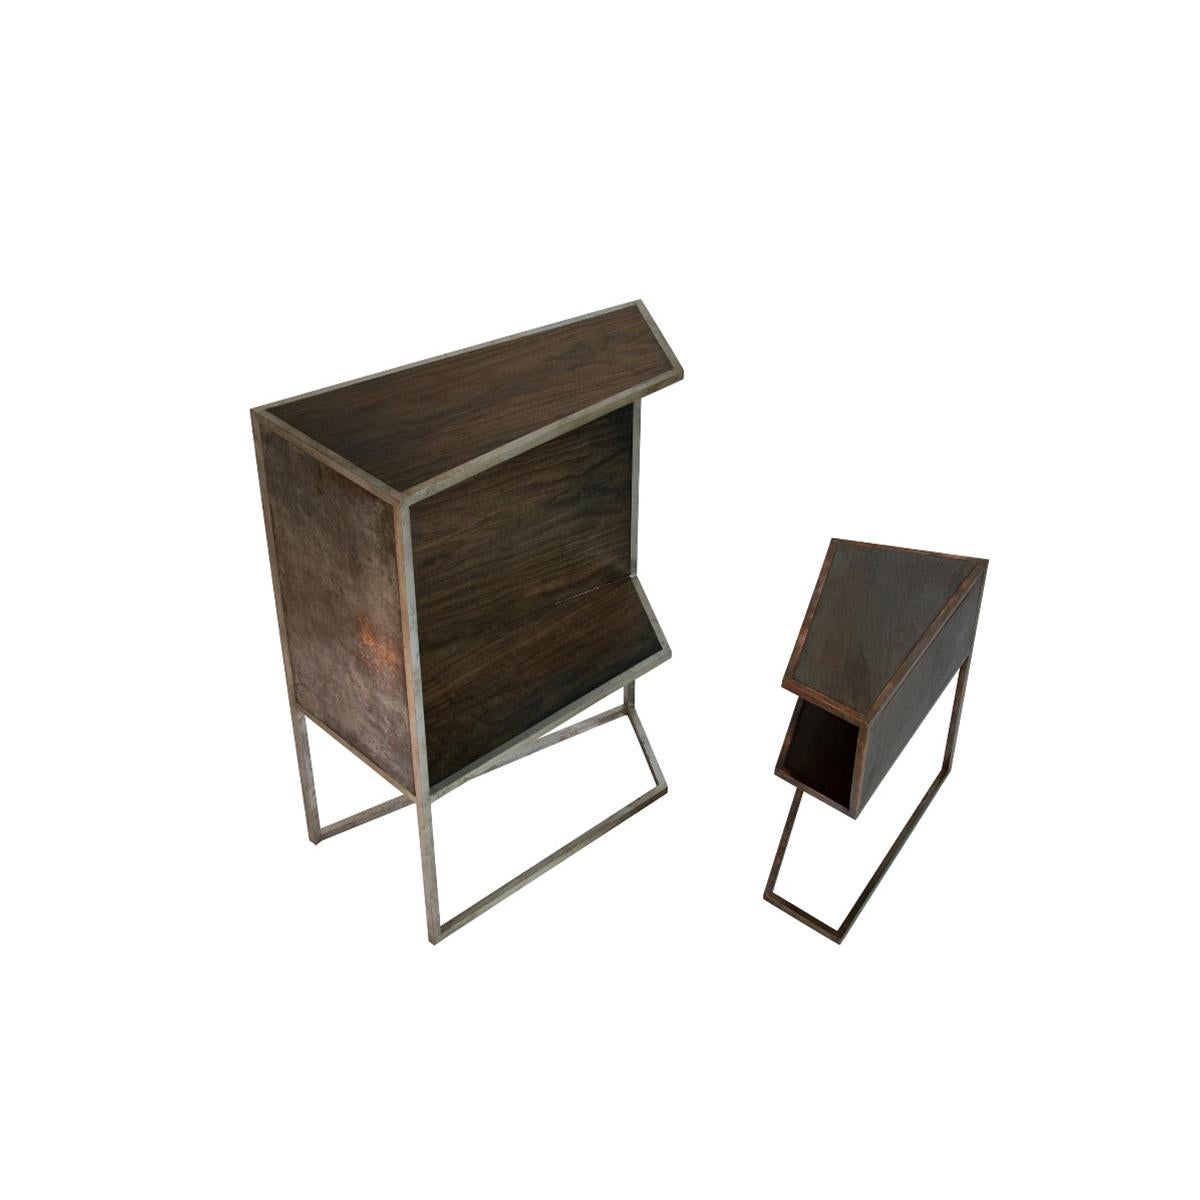 French Grosstier Modern Industrial Silver and Copper Plated Steel Framed Wood Cabinet